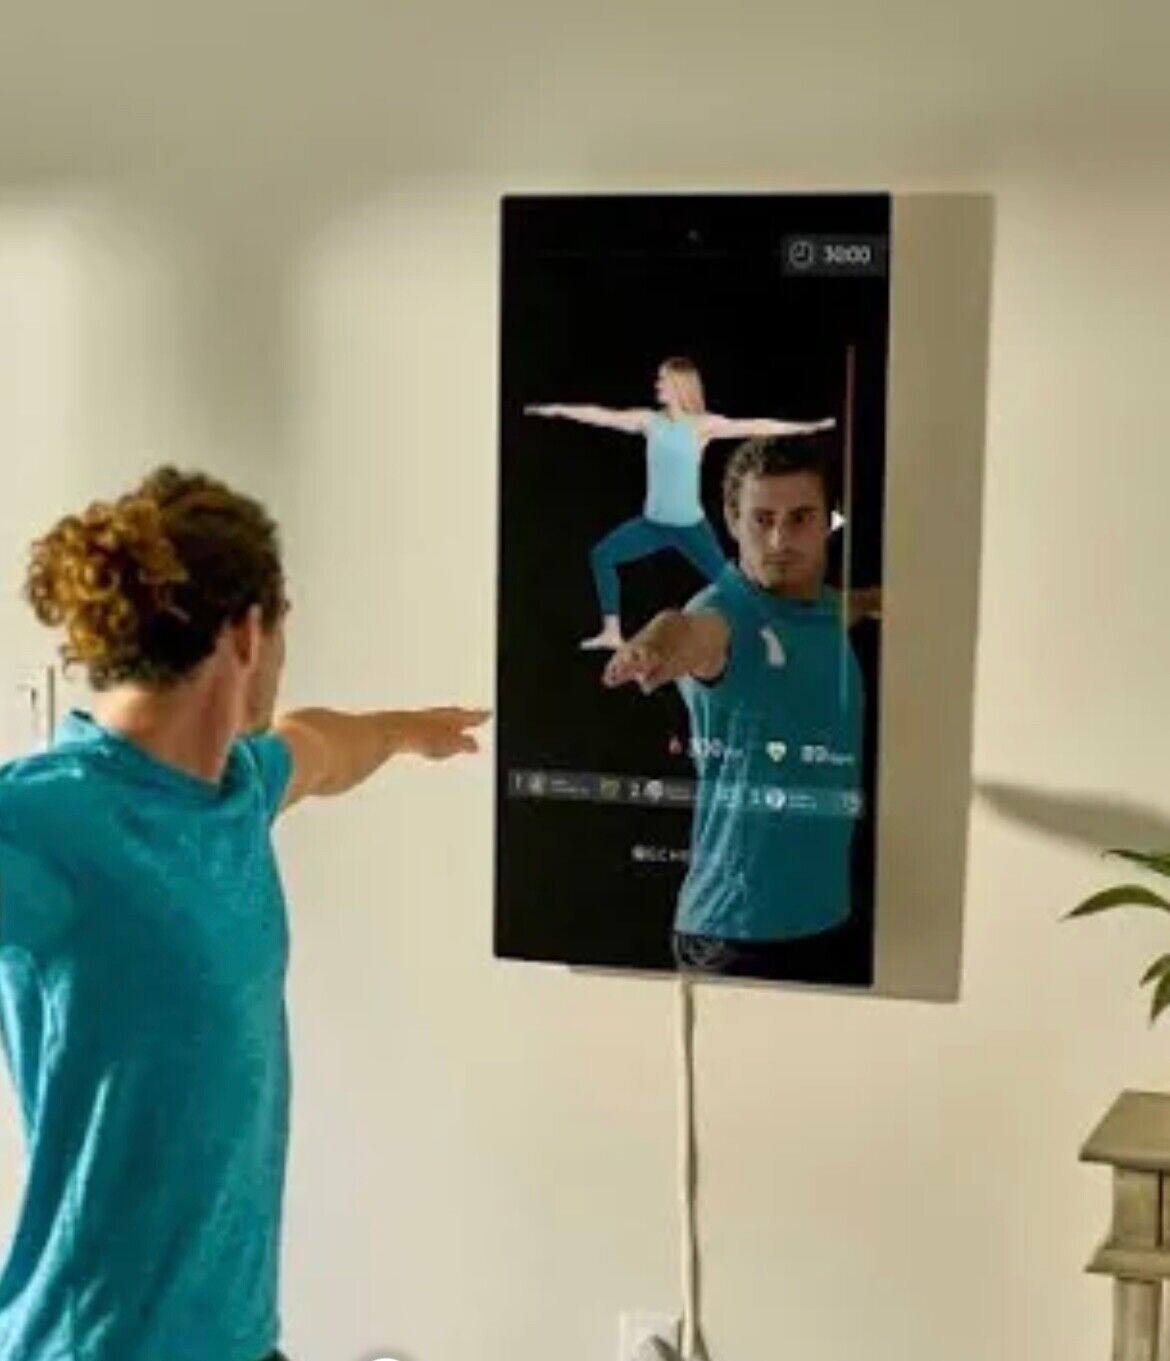 Smart mirror exercise workout, brand new out of box, never used